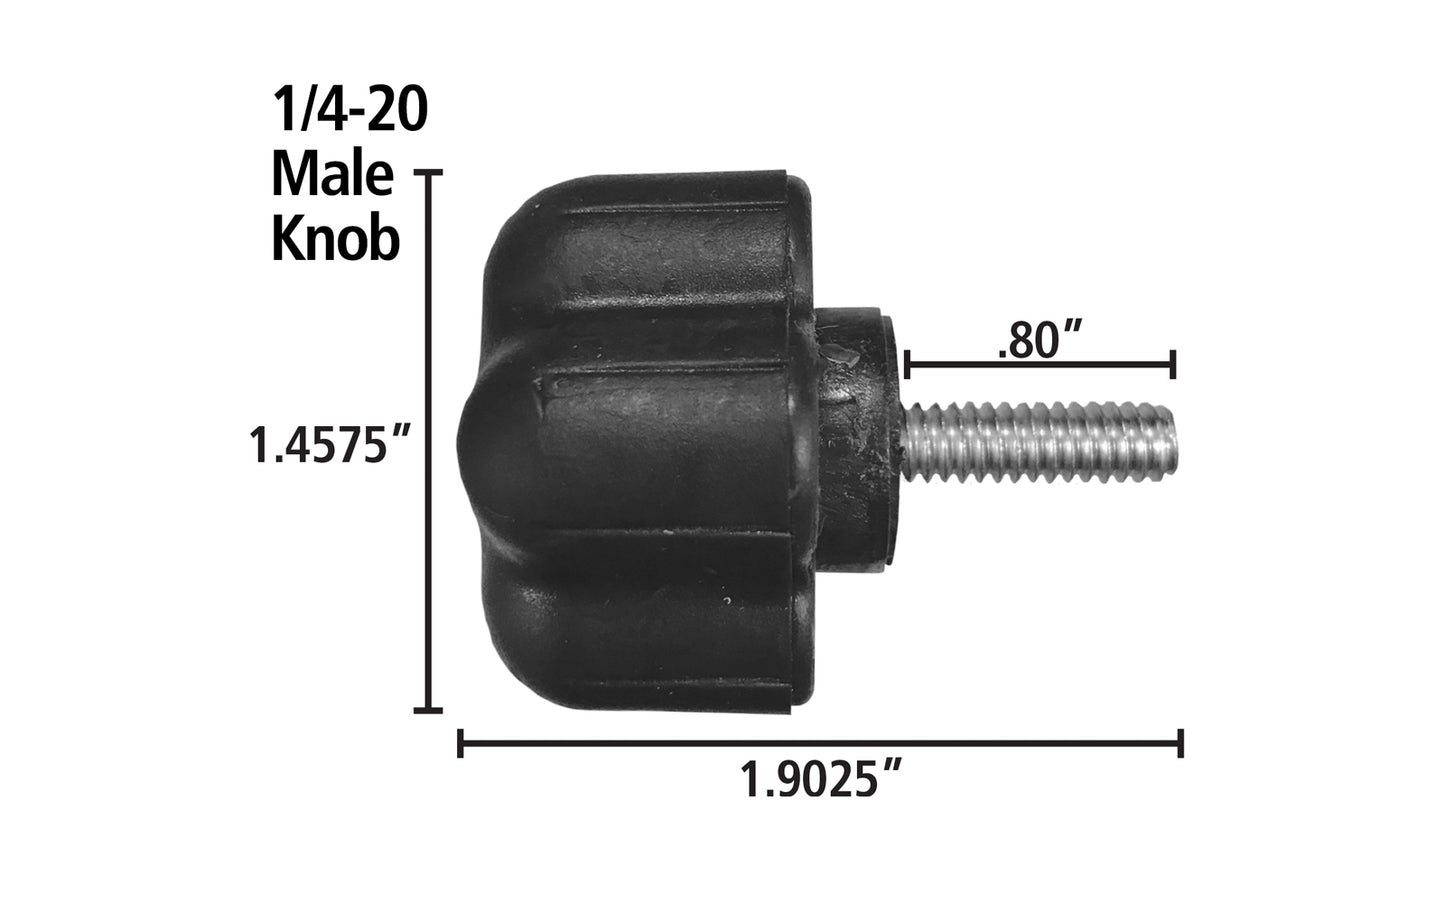 FastCap knobs are over-molded with a rubber coating, which makes them feel & work great. 1/4-20 male thread. FastCap Model KNOB 1/4-20 MALE. Utility Five Point Knob. Rubberized grip. 1/4-20 thread. Machine Knobs. 663807029720. 5 point knob. Utility Knob. Male Knob